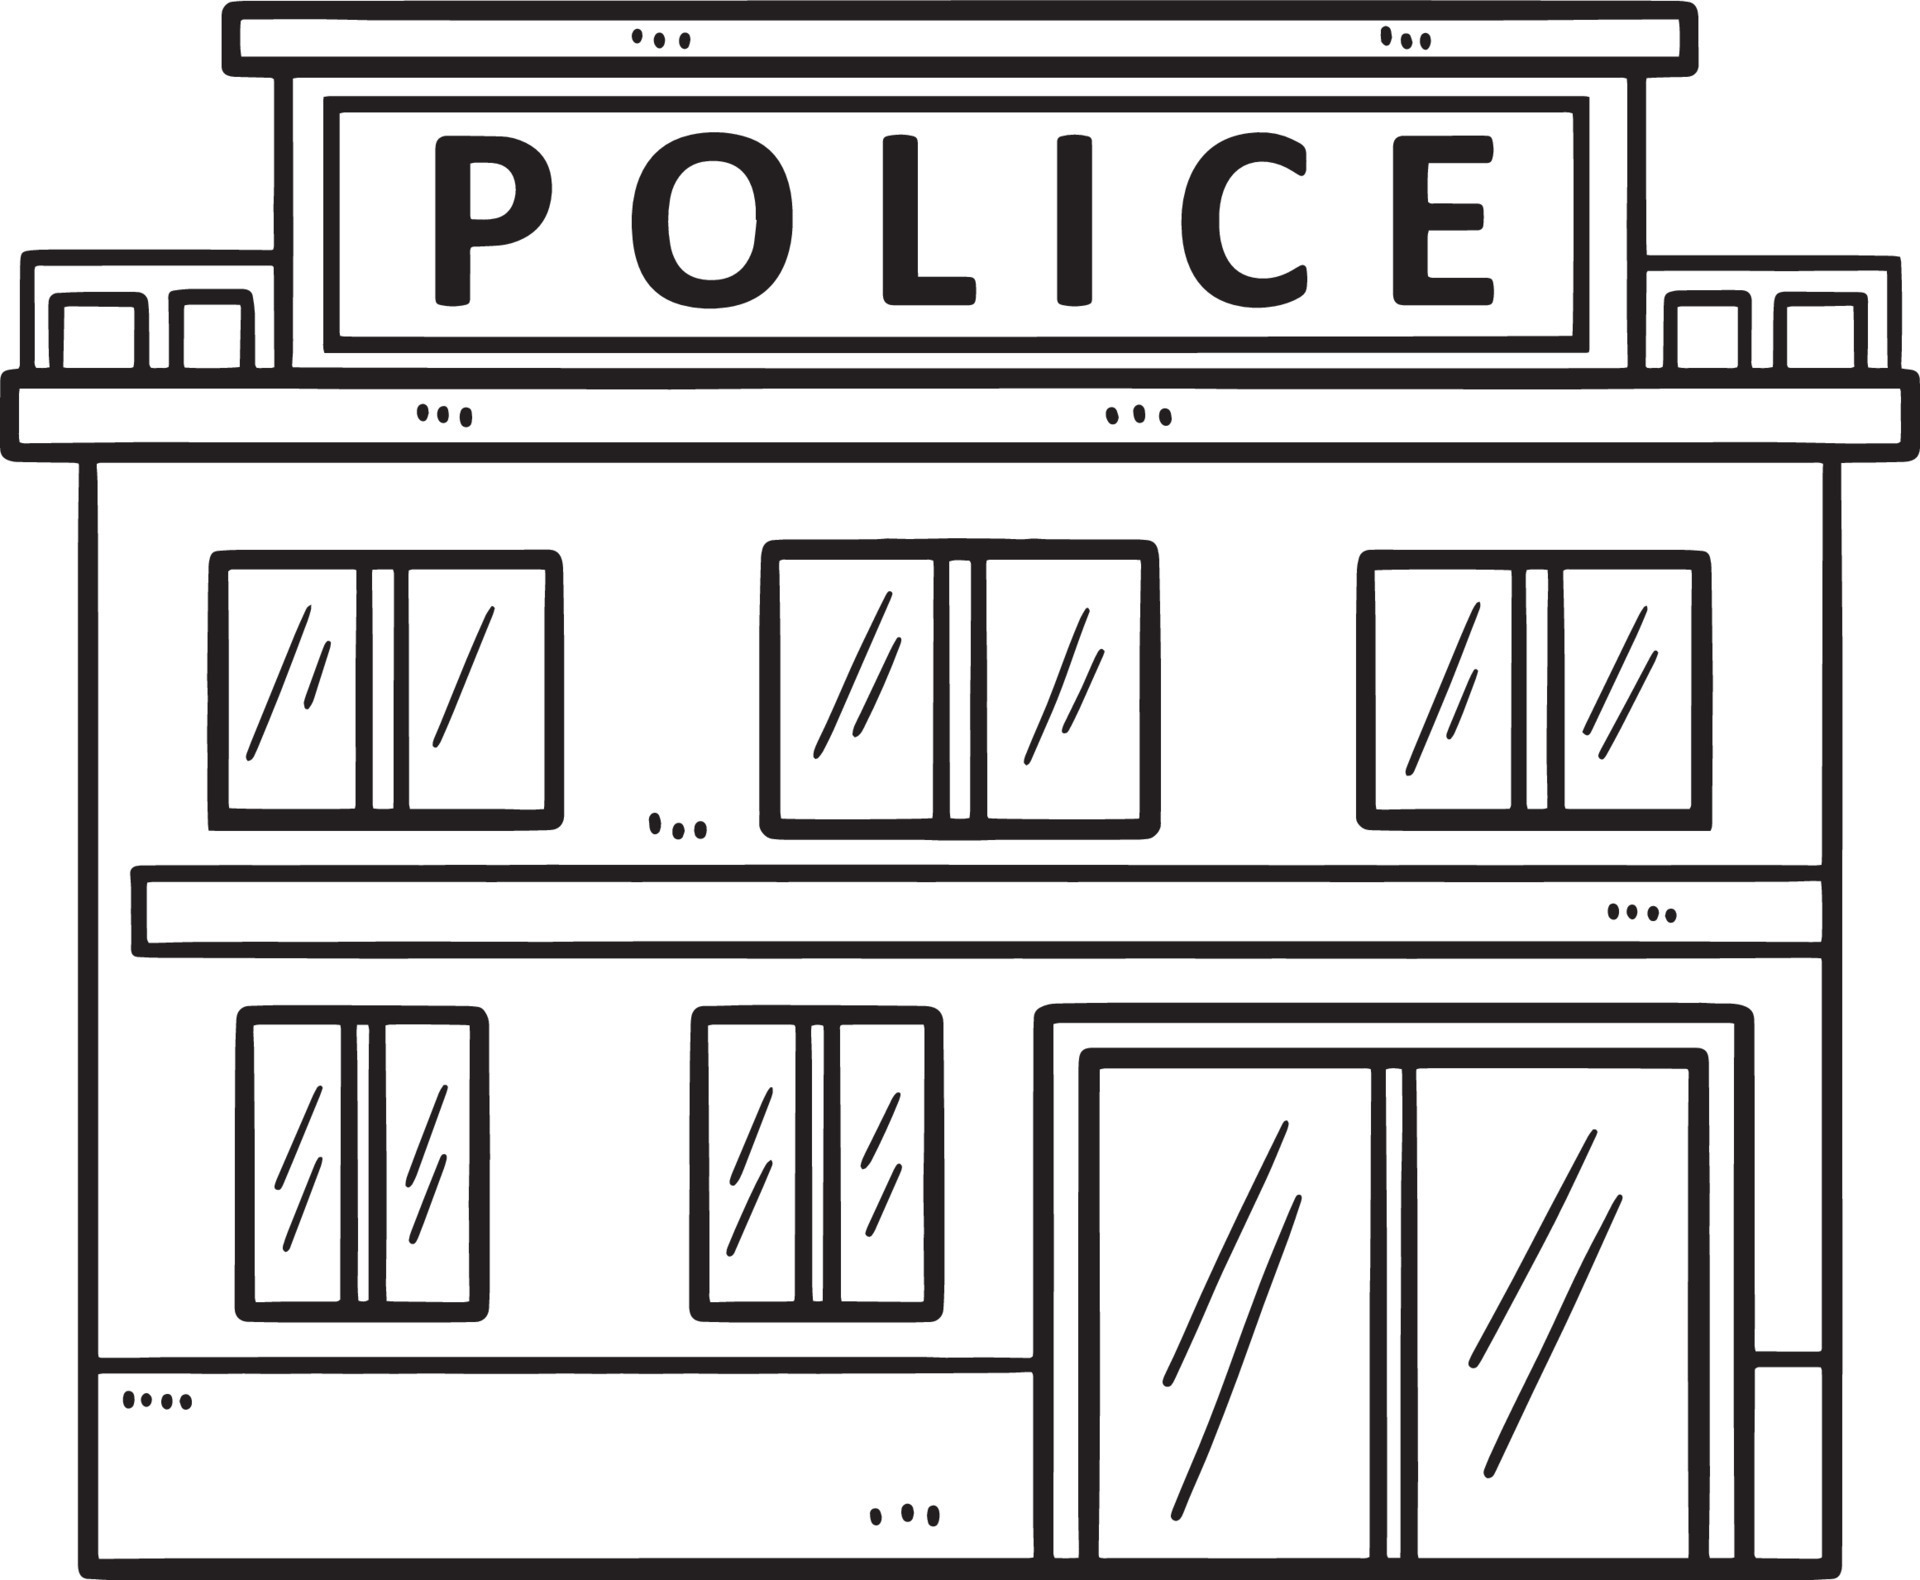 https://static.vecteezy.com/system/resources/previews/012/902/481/original/police-station-isolated-coloring-page-for-kids-free-vector.jpg